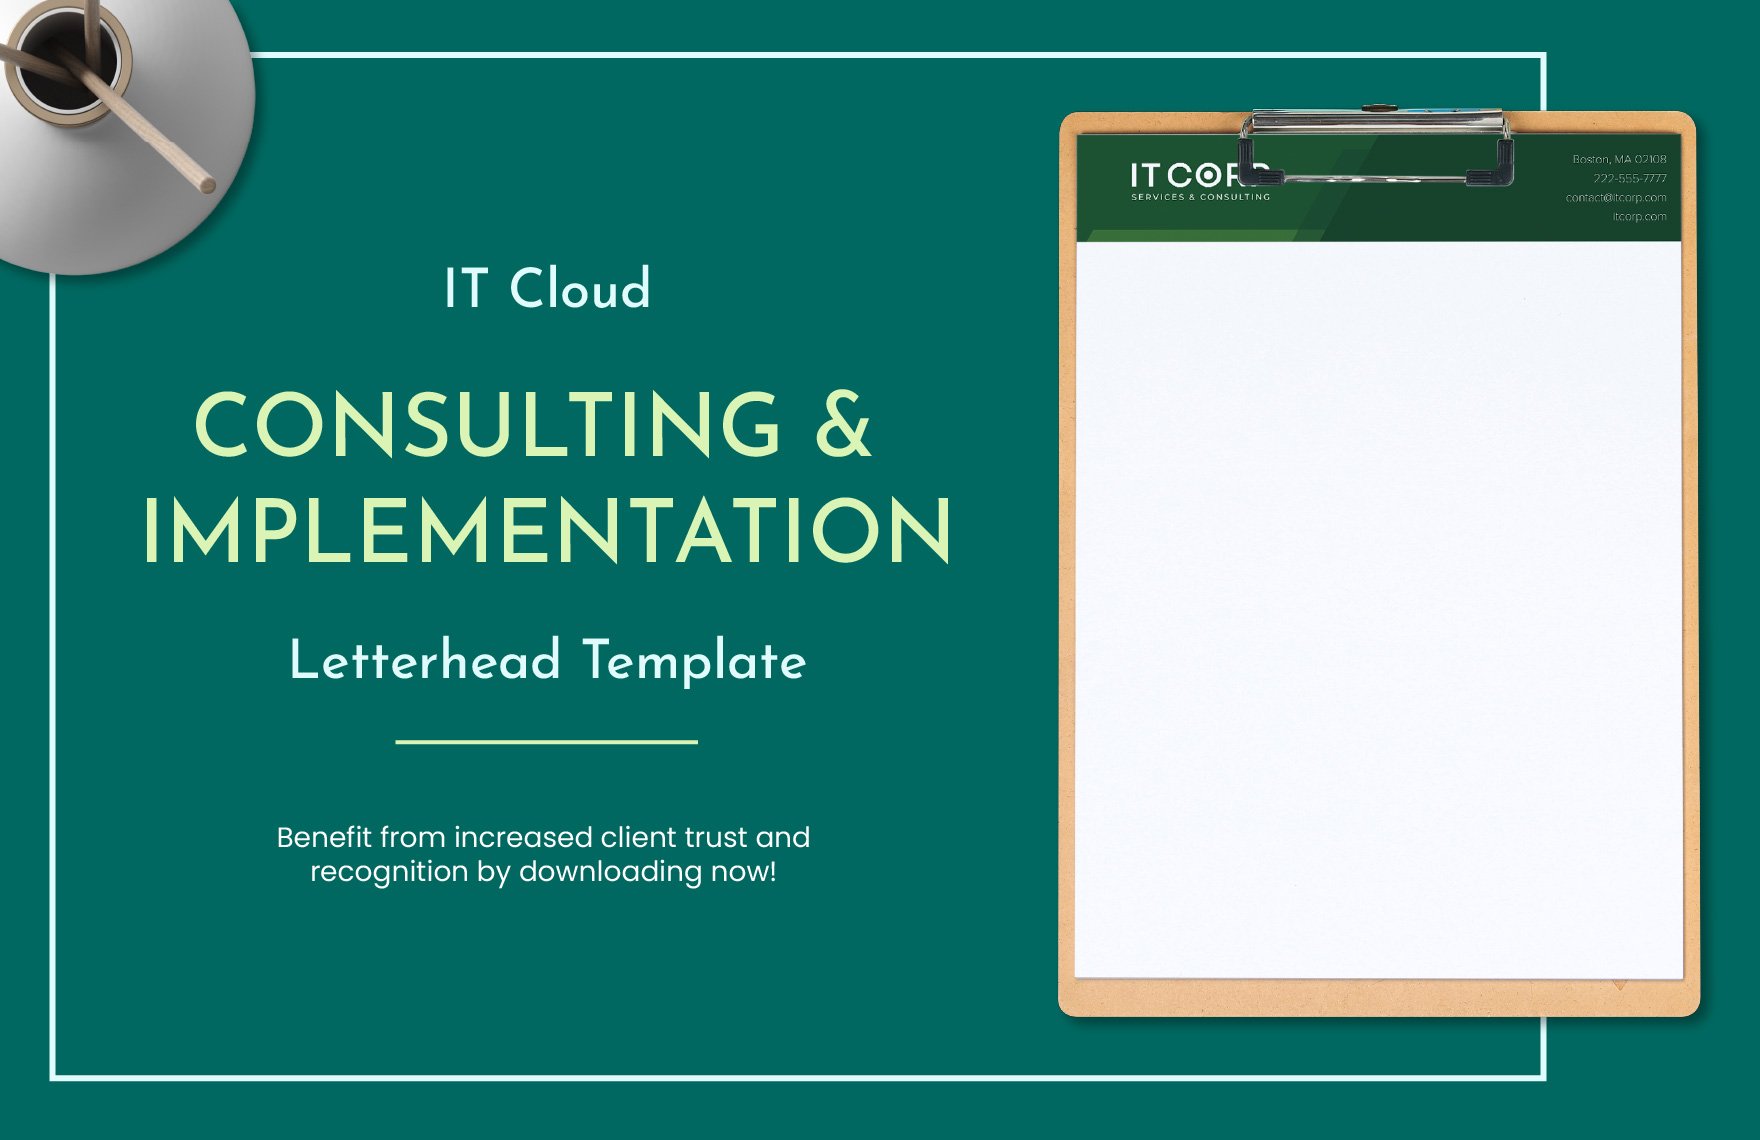 IT Cloud Consulting & Implementation Letterhead Template